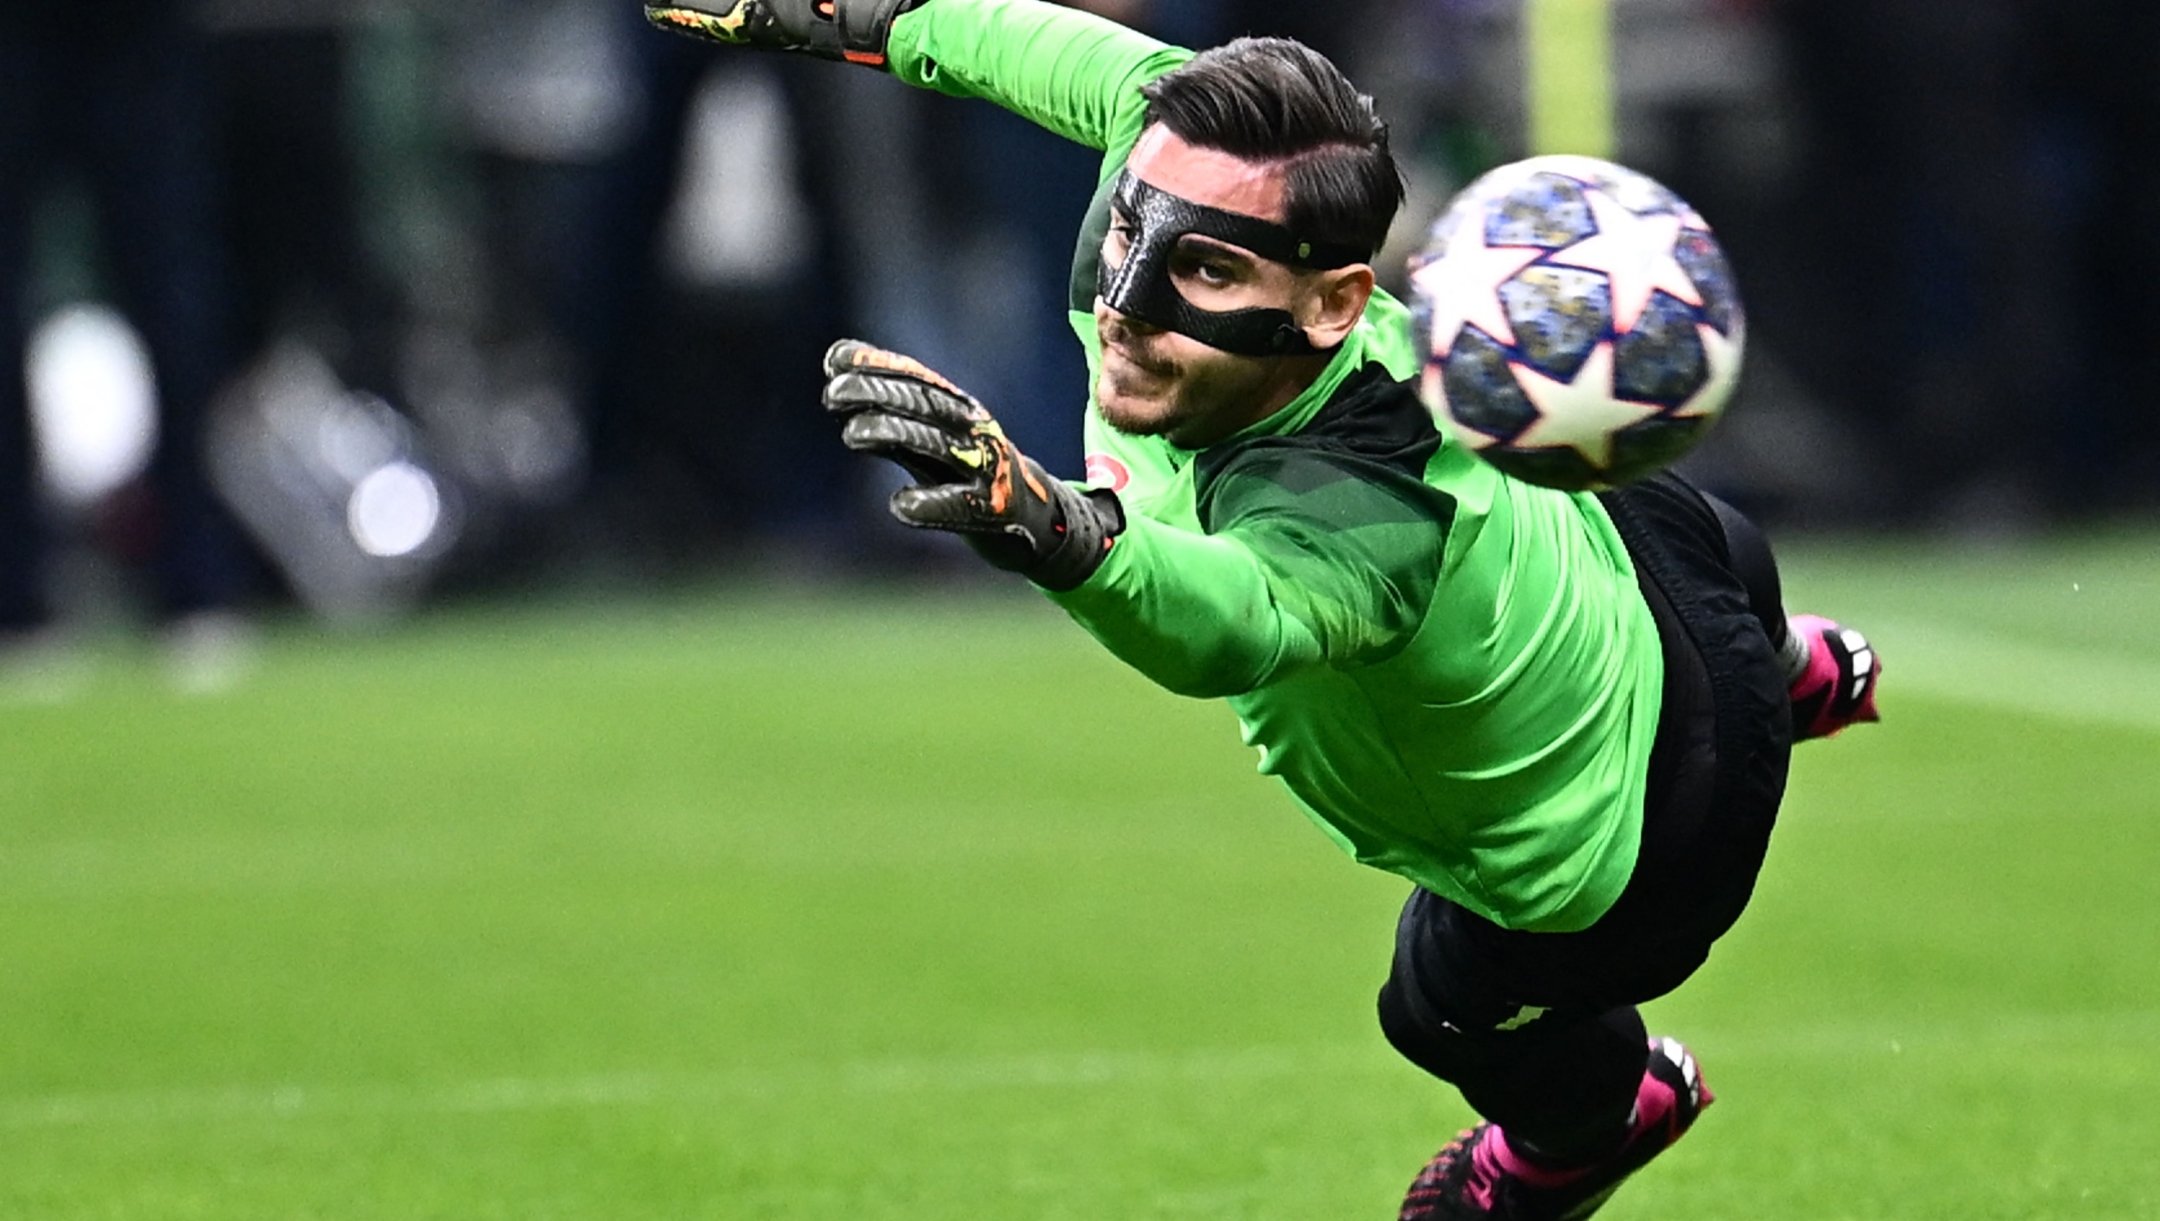 TOPSHOT - Napoli's Italian goalkeeper Alex Meret warms up prior to the UEFA Champions League quarter-finals first leg football match between AC Milan and SSC Napoli on April 12, 2023 at the San Siro stadium in Milan. (Photo by GABRIEL BOUYS / AFP)